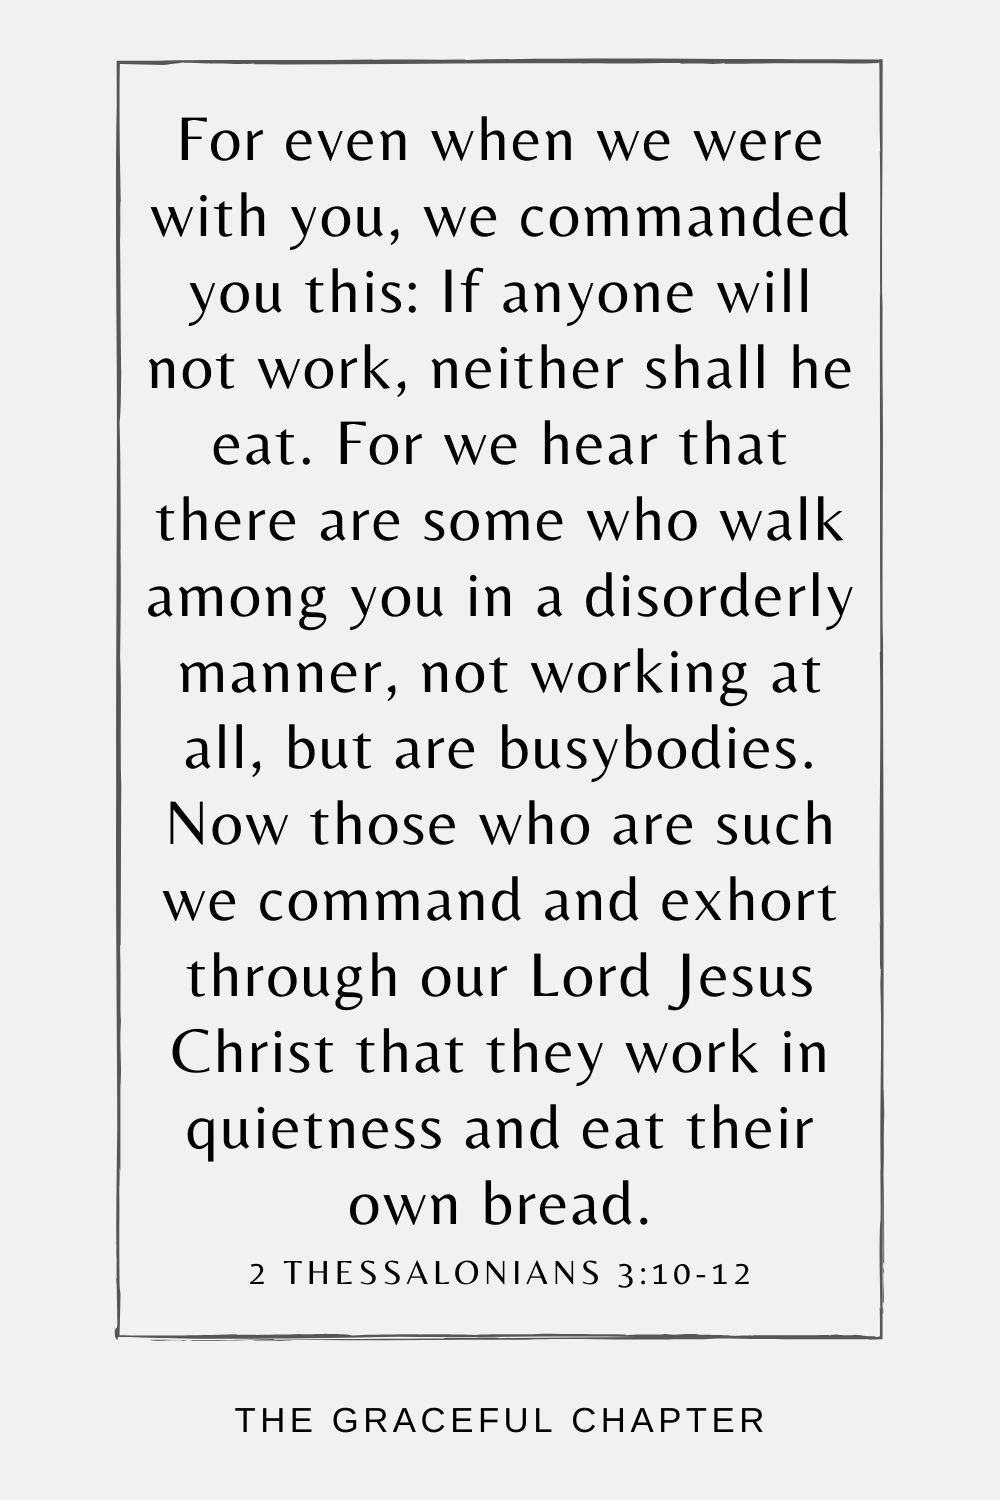 For even when we were with you, we commanded you this: If anyone will not work, neither shall he eat. For we hear that there are some who walk among you in a disorderly manner, not working at all, but are busybodies. Now those who are such we command and exhort through our Lord Jesus Christ that they work in quietness and eat their own bread. 2 Thessalonians 3:10-12